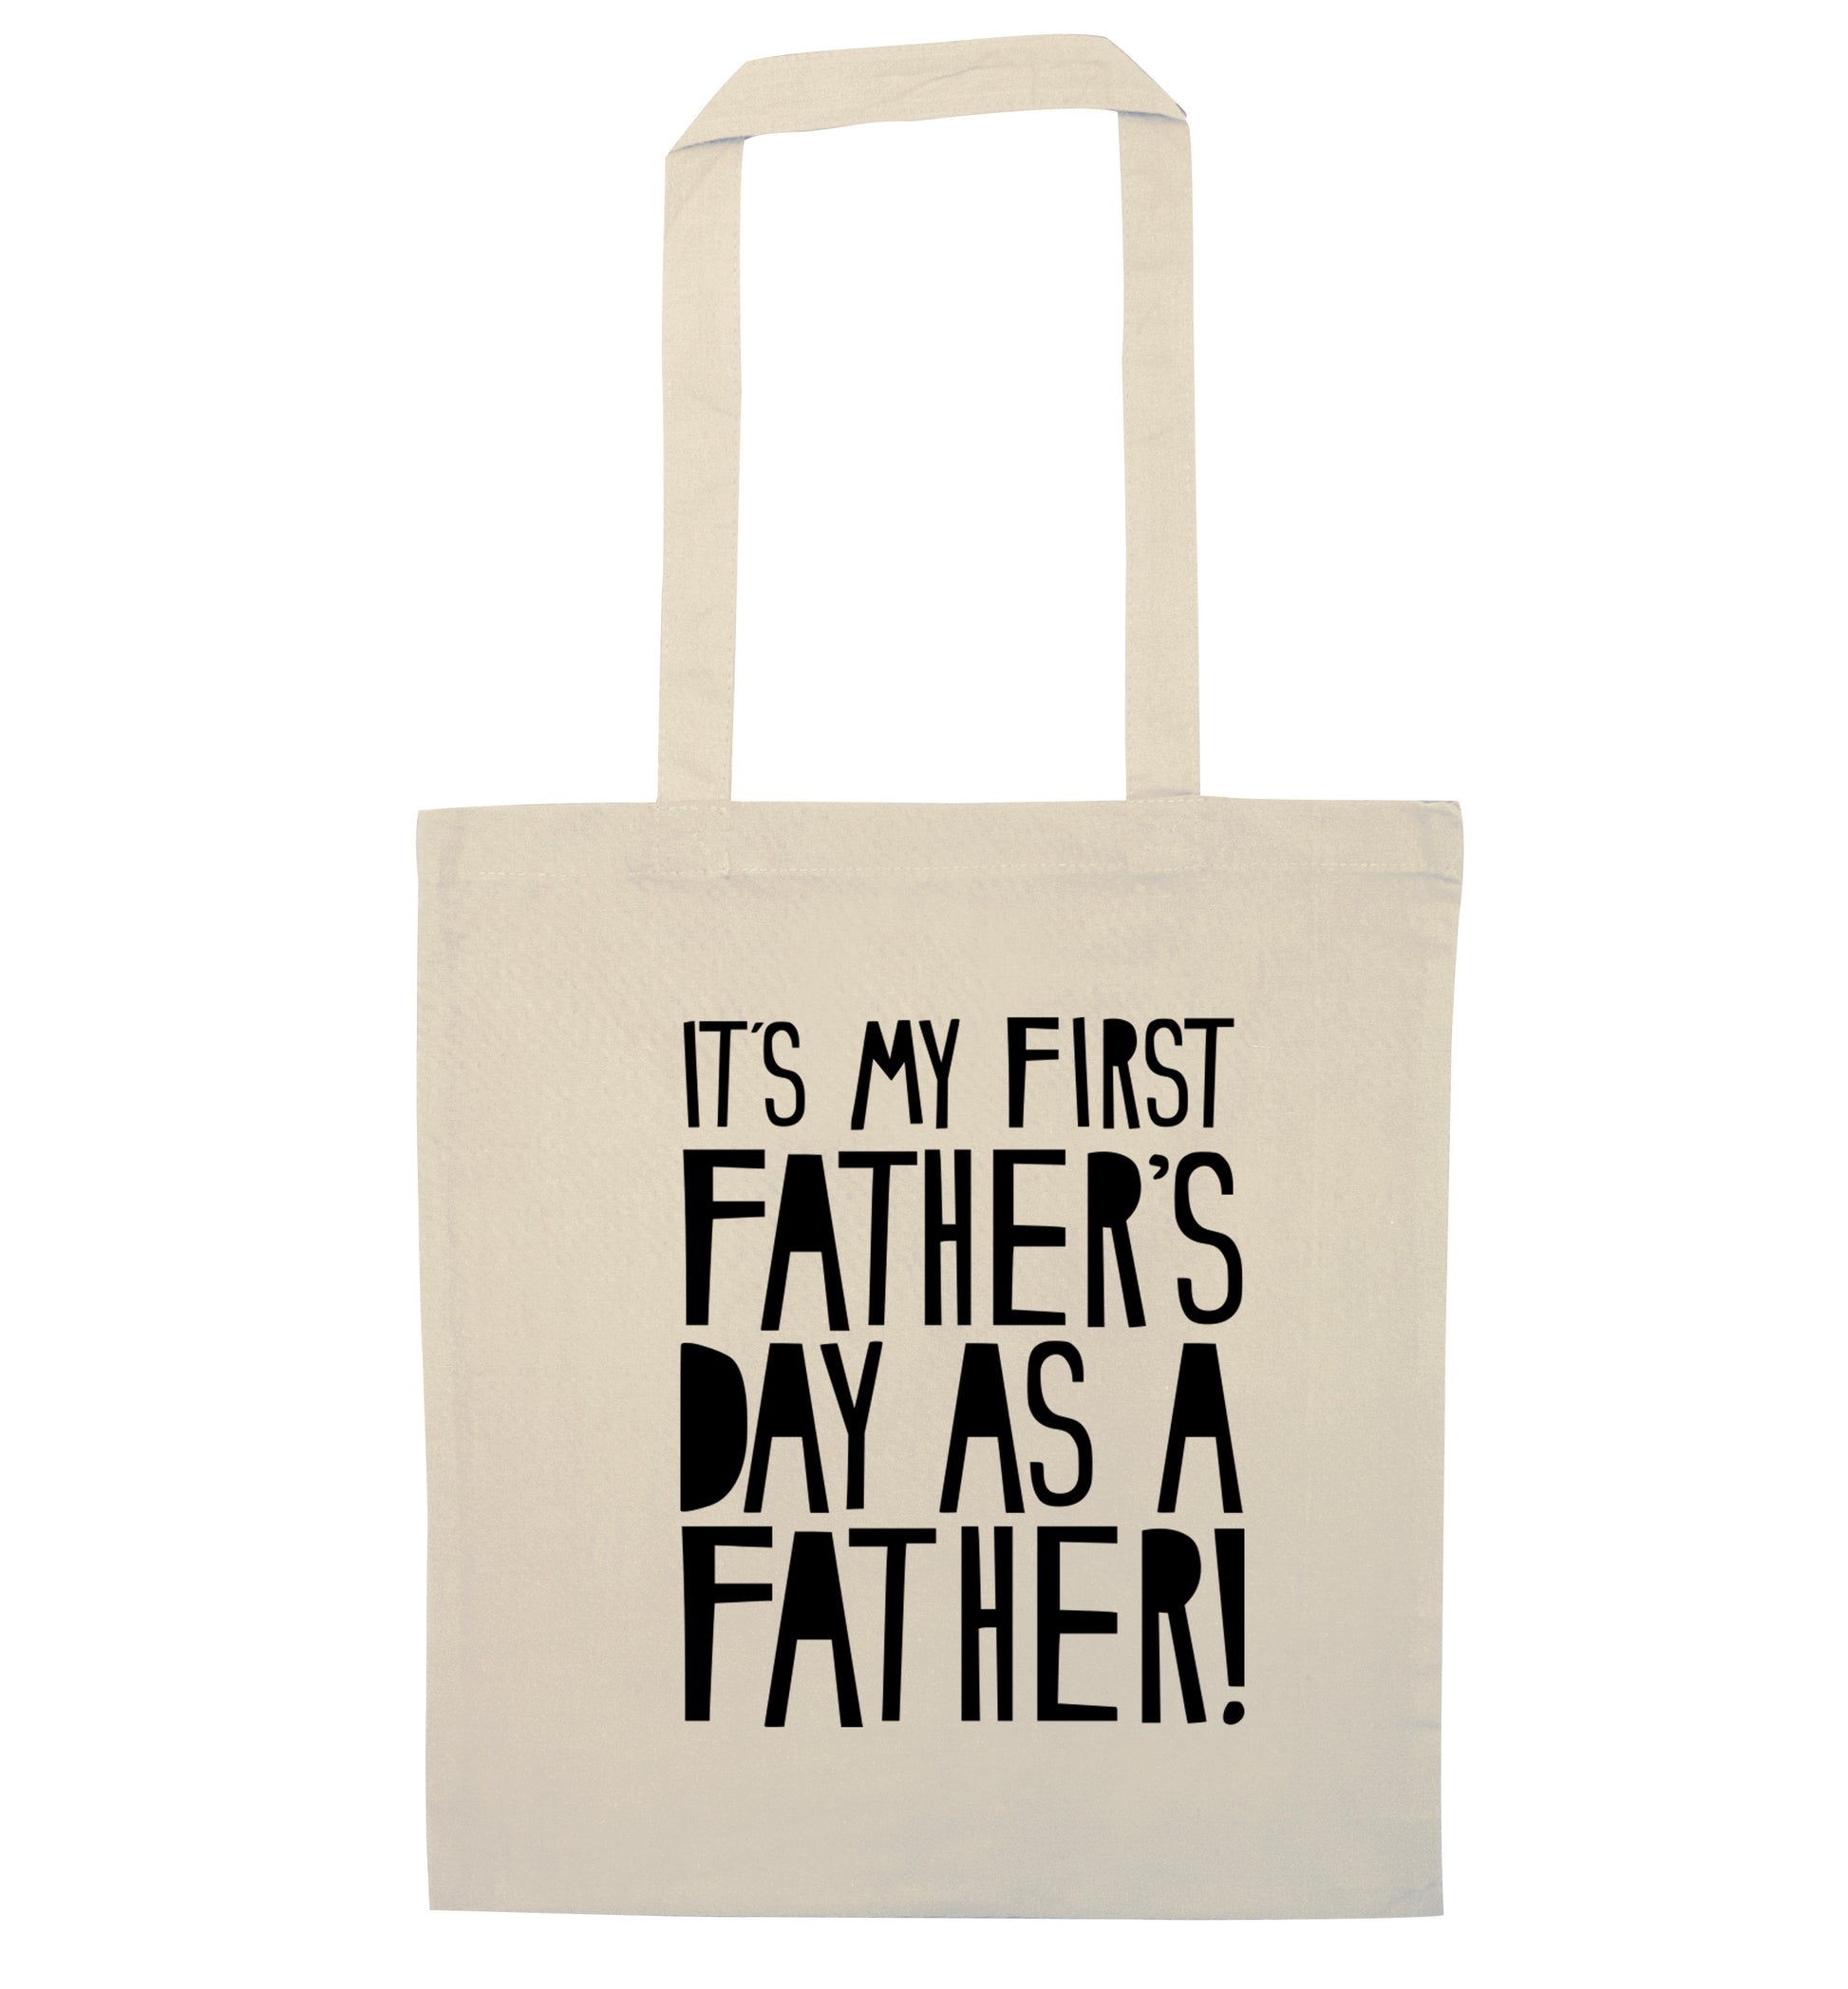 It's my first Father's Day as a father! natural tote bag